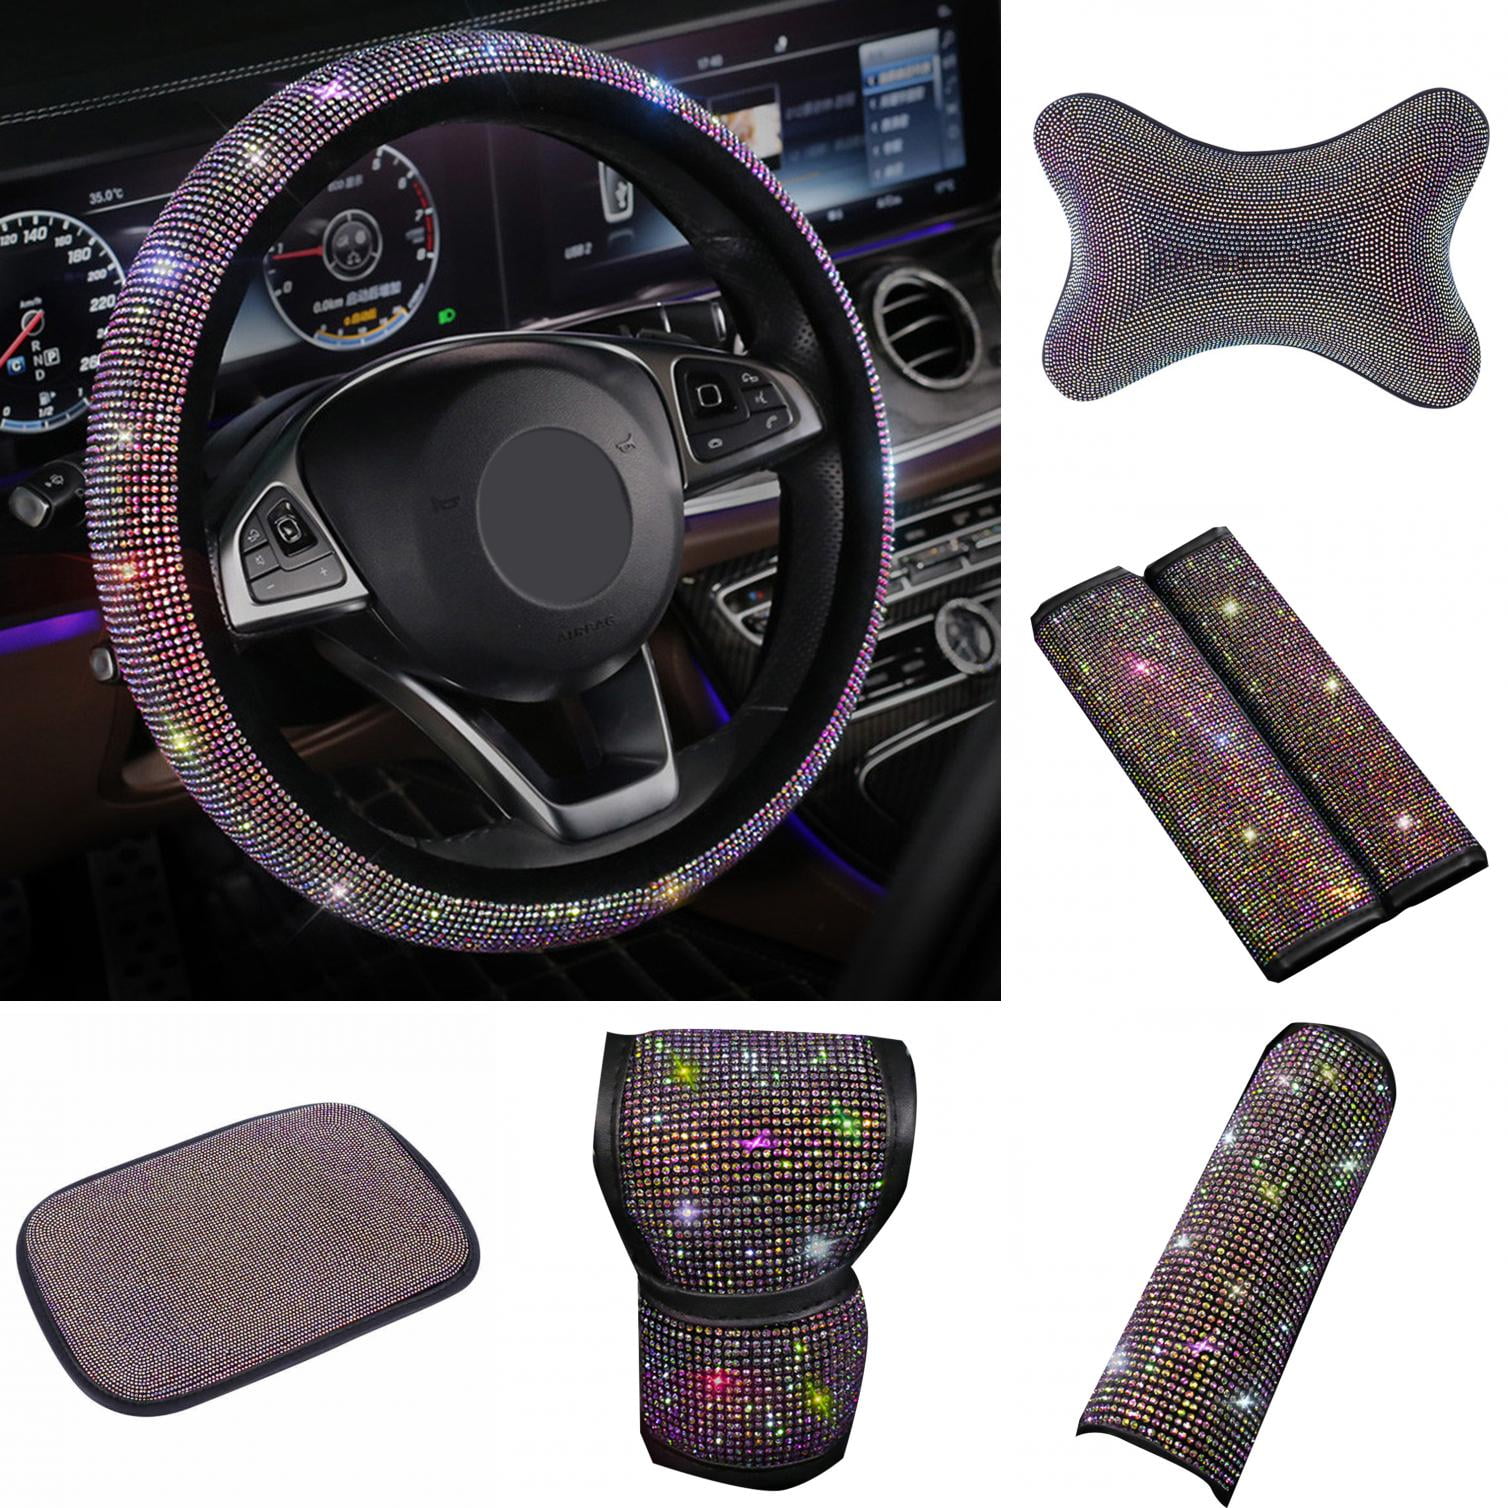 Bling Car Accessories for Women Multicolor Bling Steering Wheel Cover Set Seat Belt Shoulder Pads Crystal Ring Emblem Sticker Glitter Gear Shift Cover Rhinestone Center Console Cover Shift Cover 